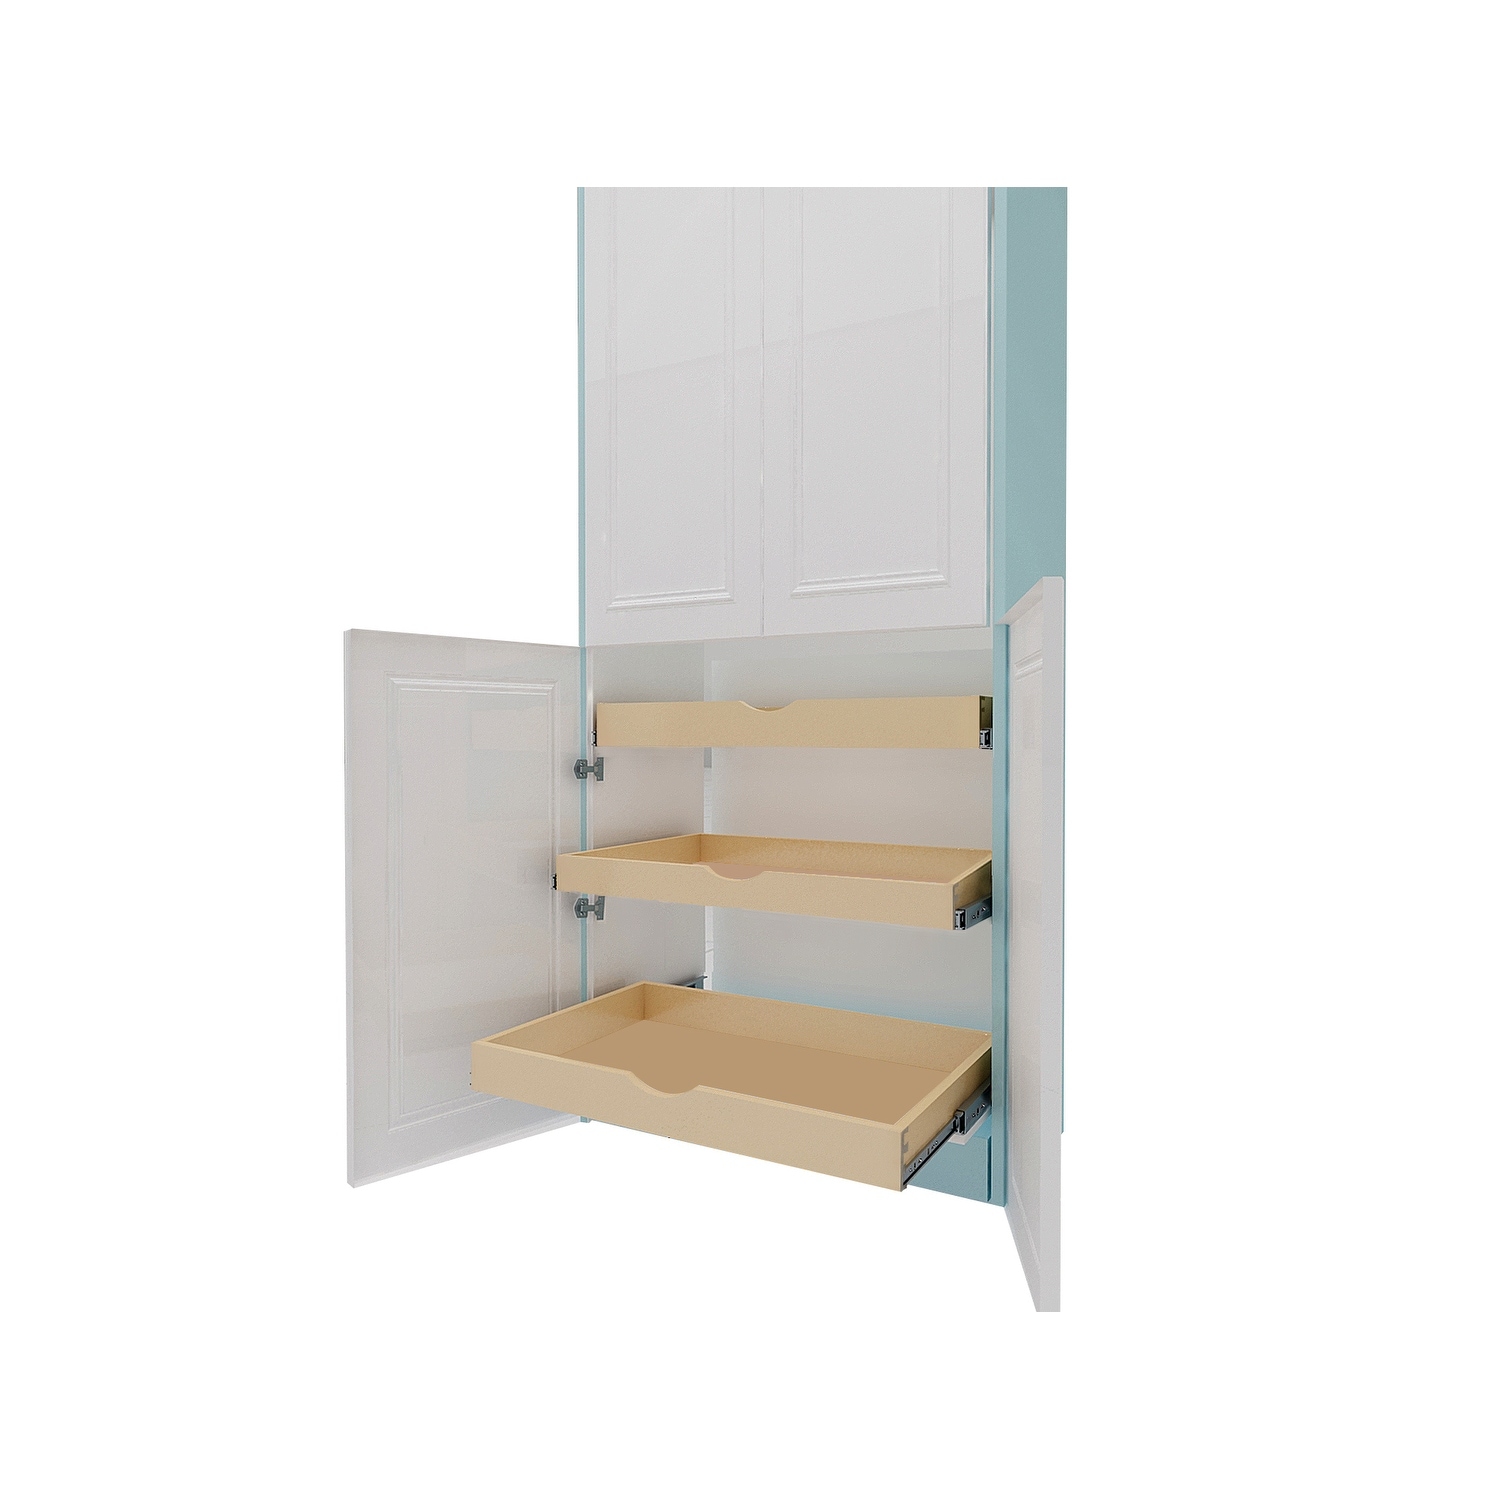 https://ak1.ostkcdn.com/images/products/is/images/direct/89cd739dd881937089f99aa3128f34f576acaa85/CabinetRTA-DIY-Slide-Out-Cabinet-Shelf-Pull-Out-Wood-Drawer-Storage.jpg